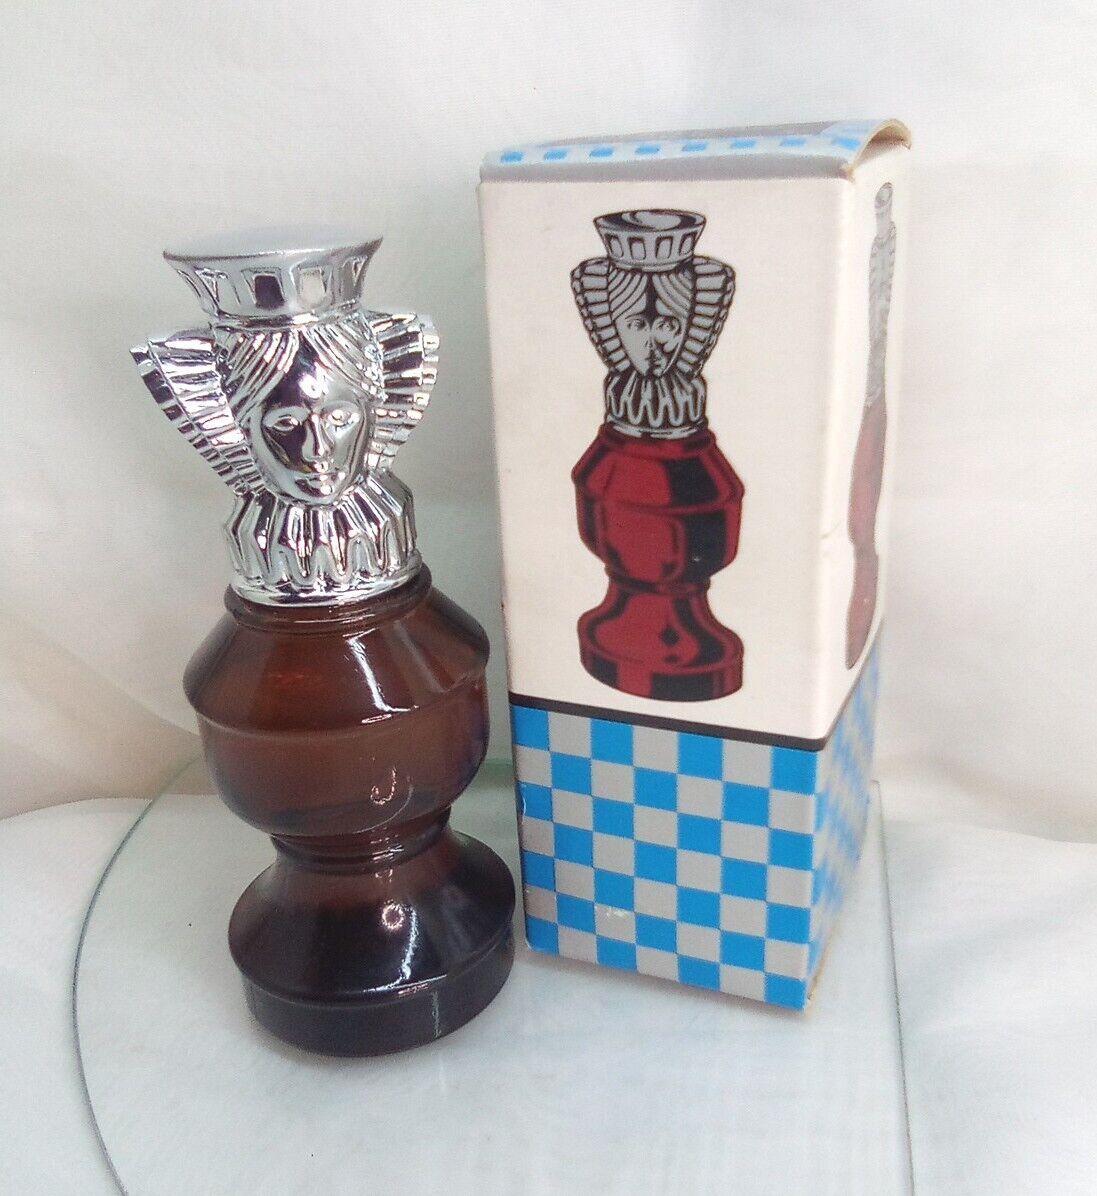 Avon The Queen Chess Piece Oland After Shave Full New Old Stock Silver Color Lid